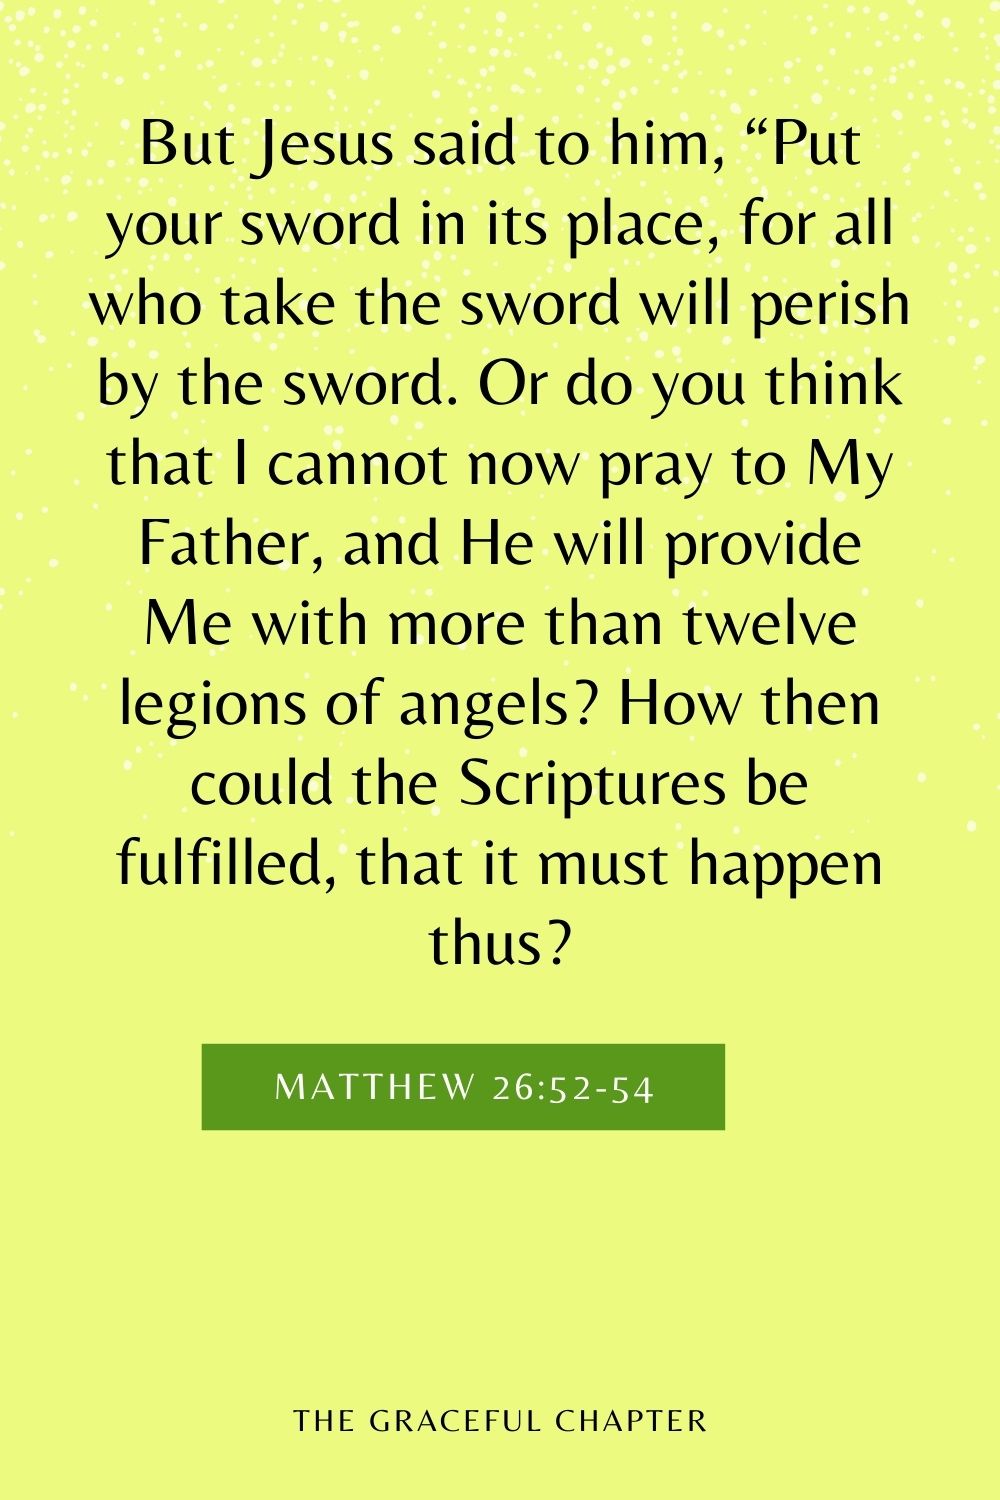 But Jesus said to him, “Put your sword in its place, for all who take the sword will perish by the sword. Or do you think that I cannot now pray to My Father, and He will provide Me with more than twelve legions of angels? How then could the Scriptures be fulfilled, that it must happen thus? Matthew 26:52-54